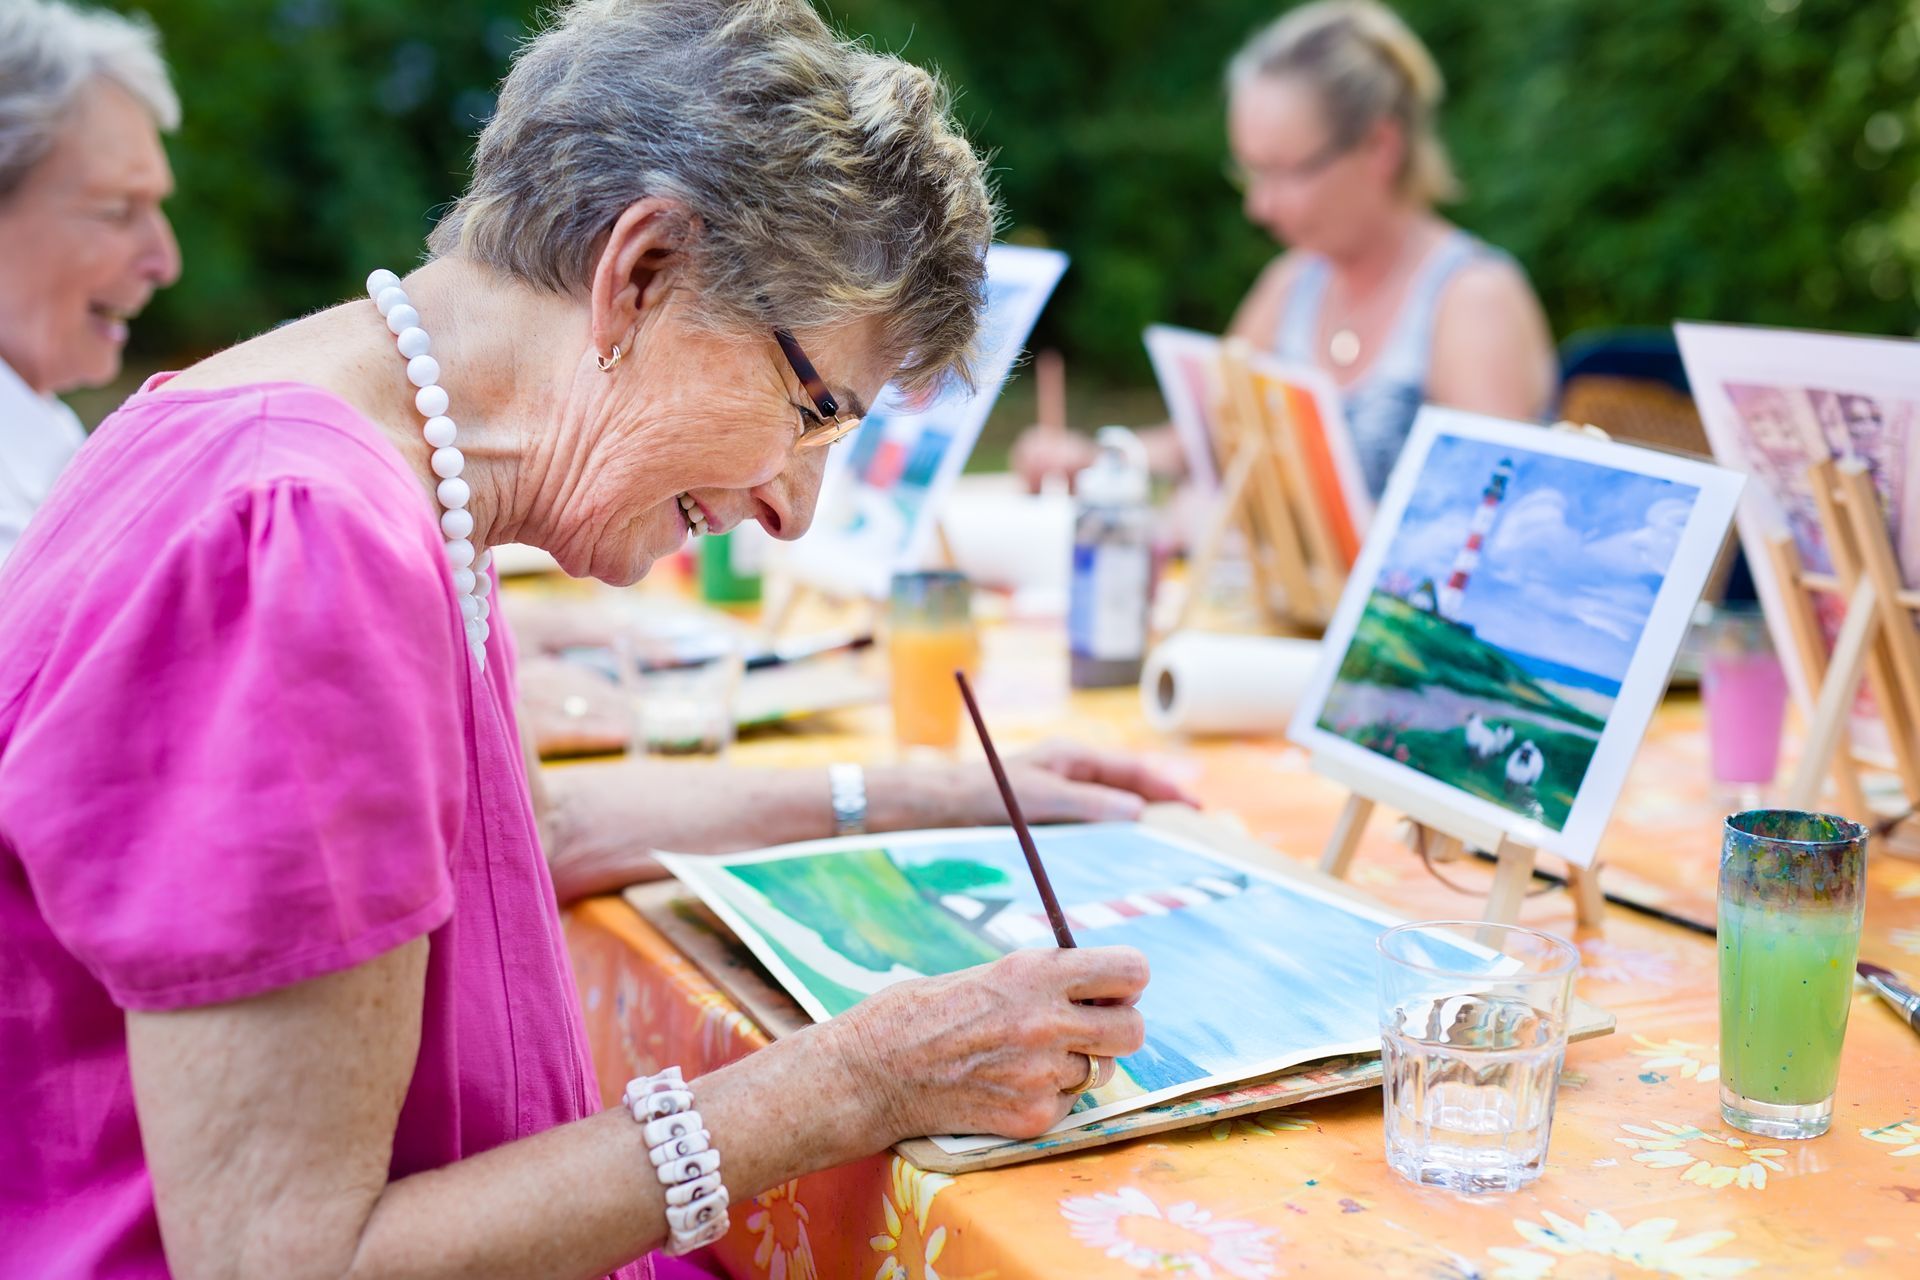 An elderly woman is sitting at a table painting a picture.